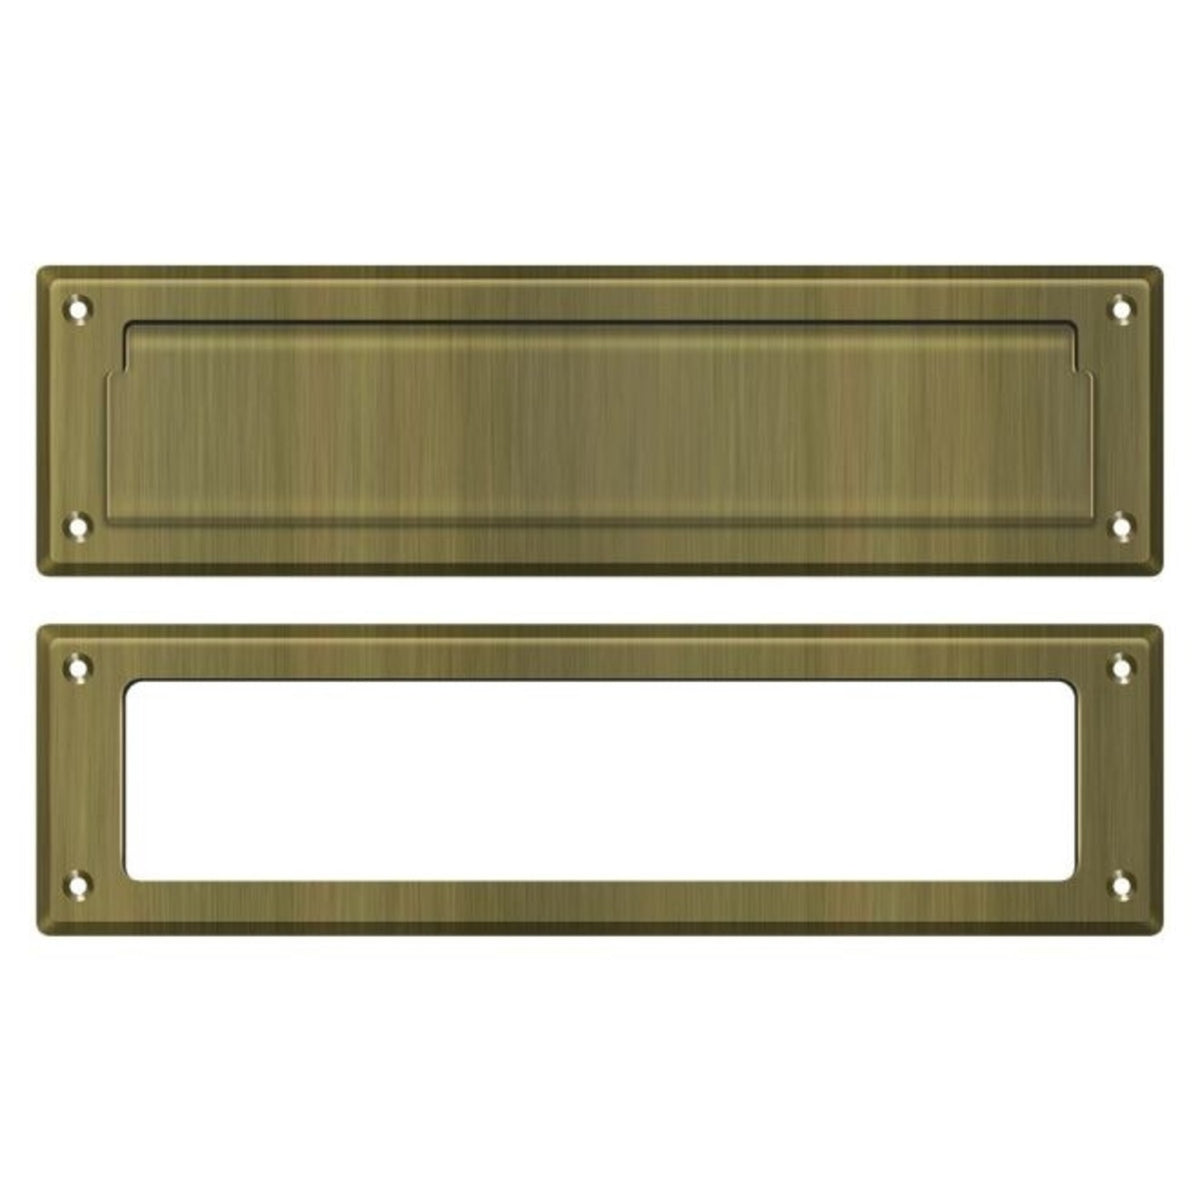 Deltana MS211U5 Mail Slot With Interior Frame, Antique Brass